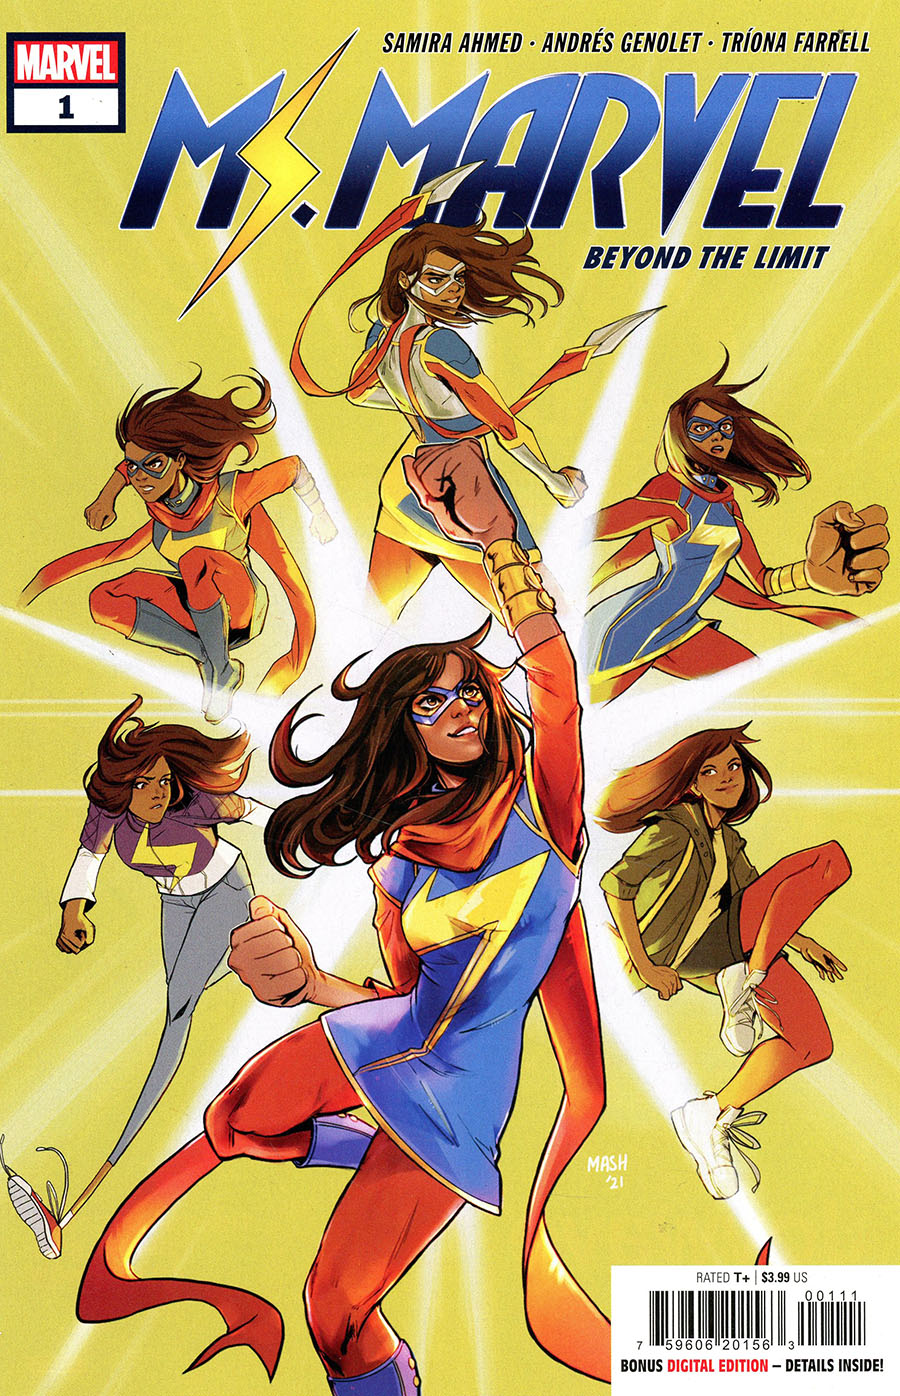 Ms Marvel Beyond The Limit #1 Cover A Regular Mashal Ahmed Cover